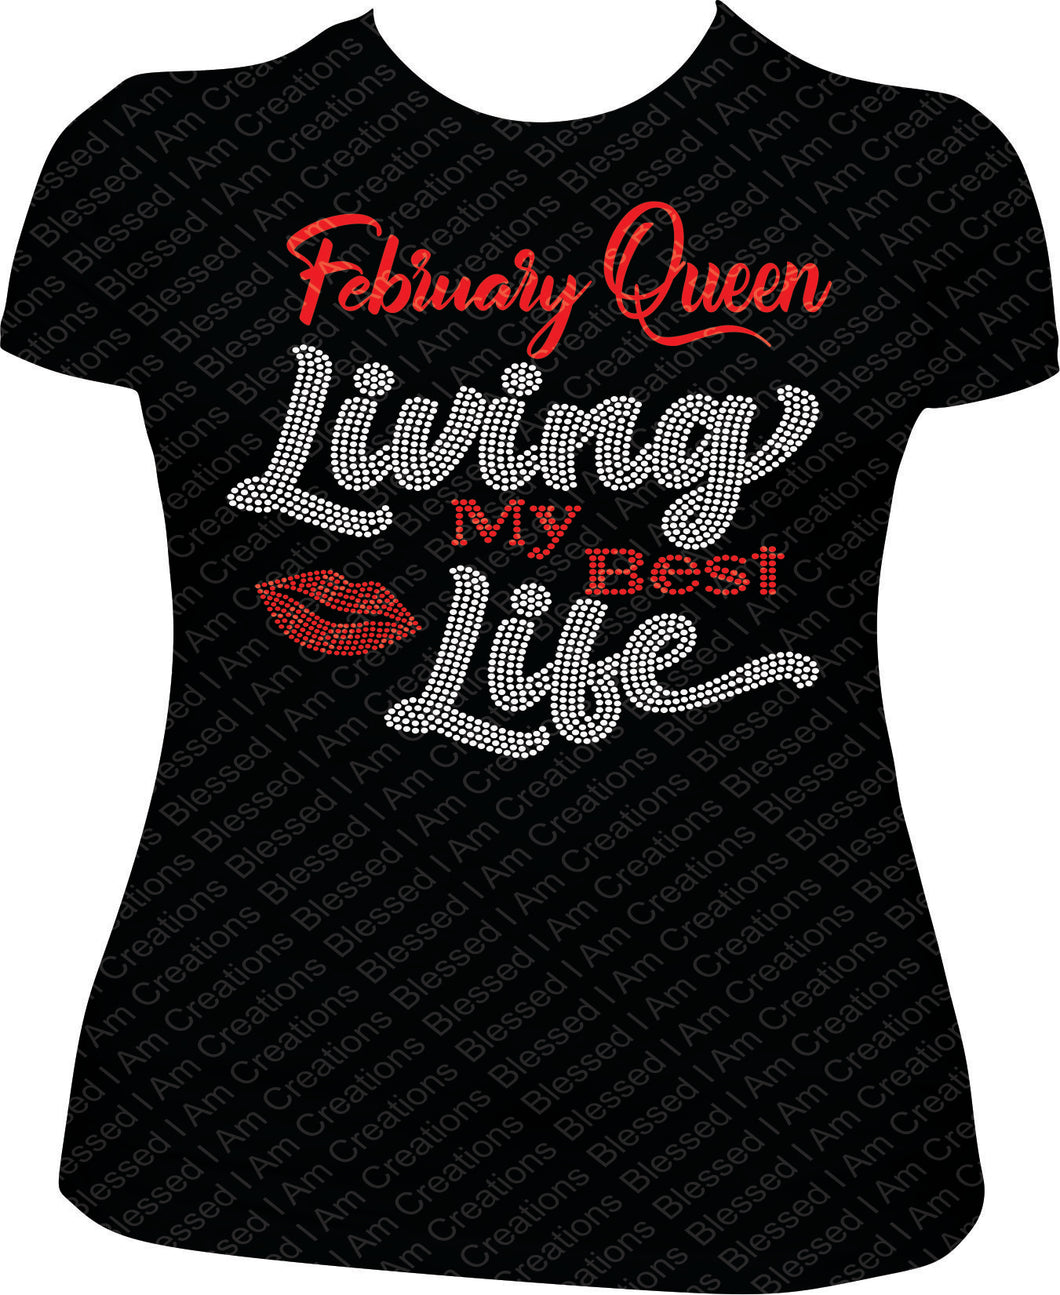 February Queen Living My Best Life Rhinestone Shirt February Bling Collection